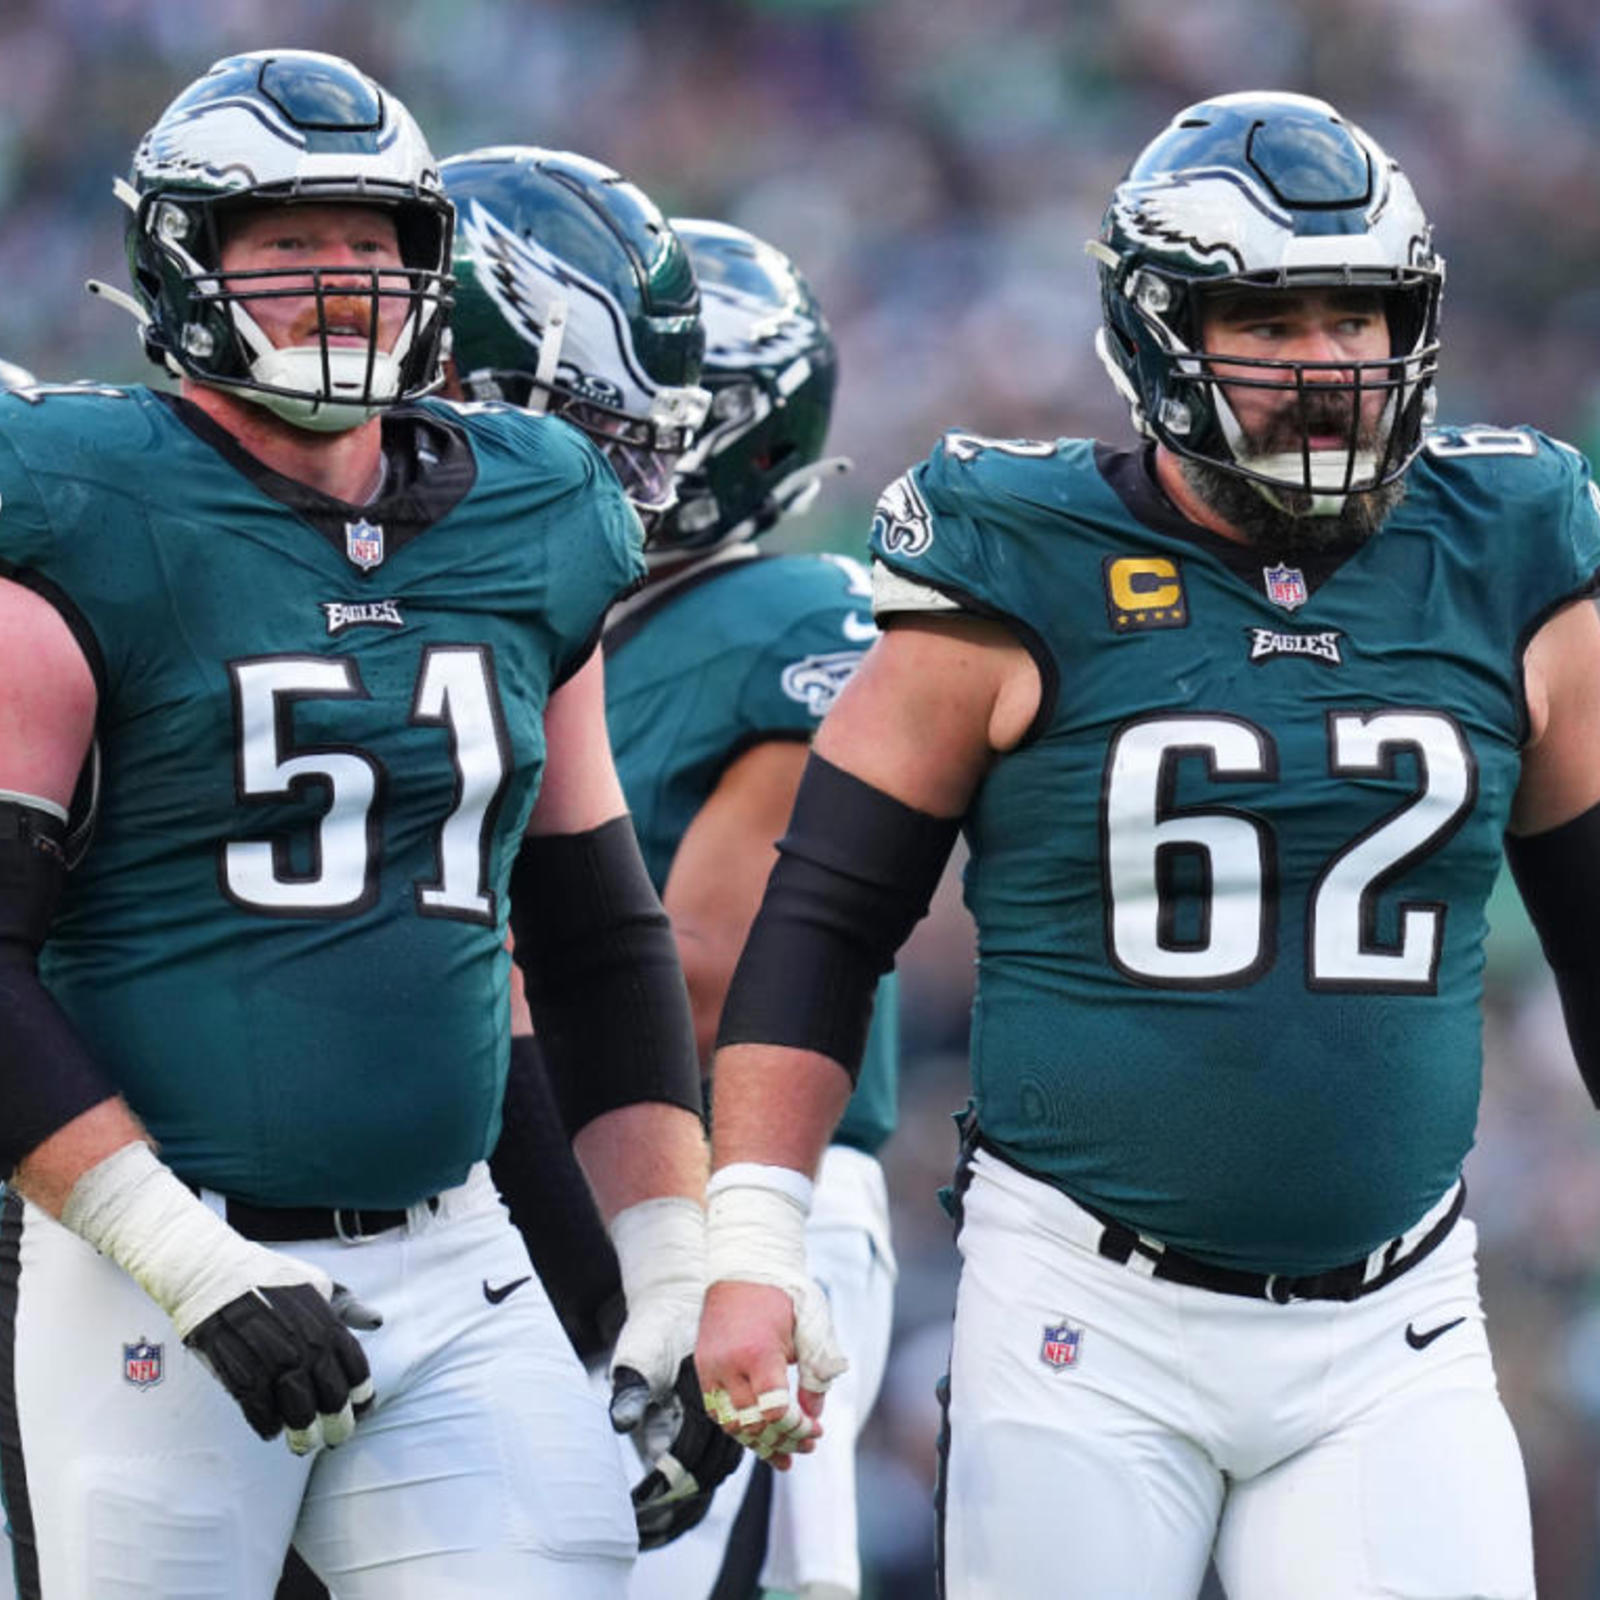 How to watch today's Philadelphia Eagles vs. Tampa Bay Buccaneers game